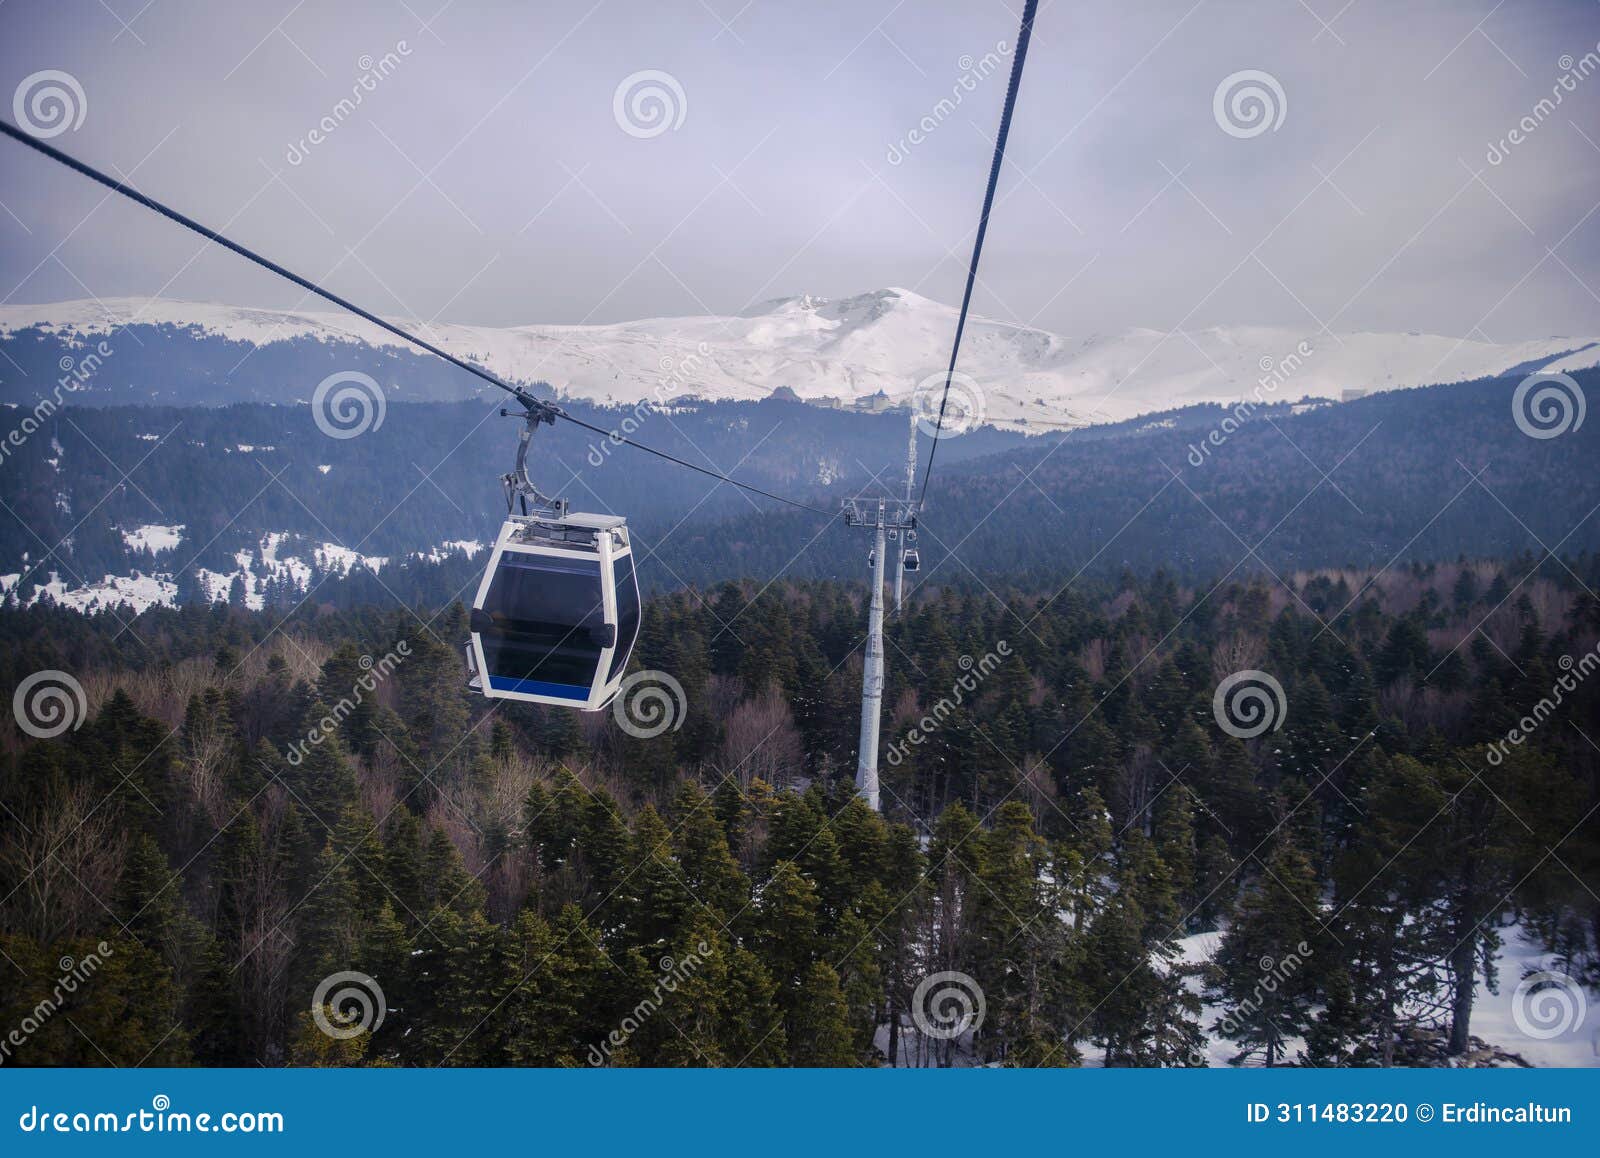 the cable cars at the uludag winter tourism center